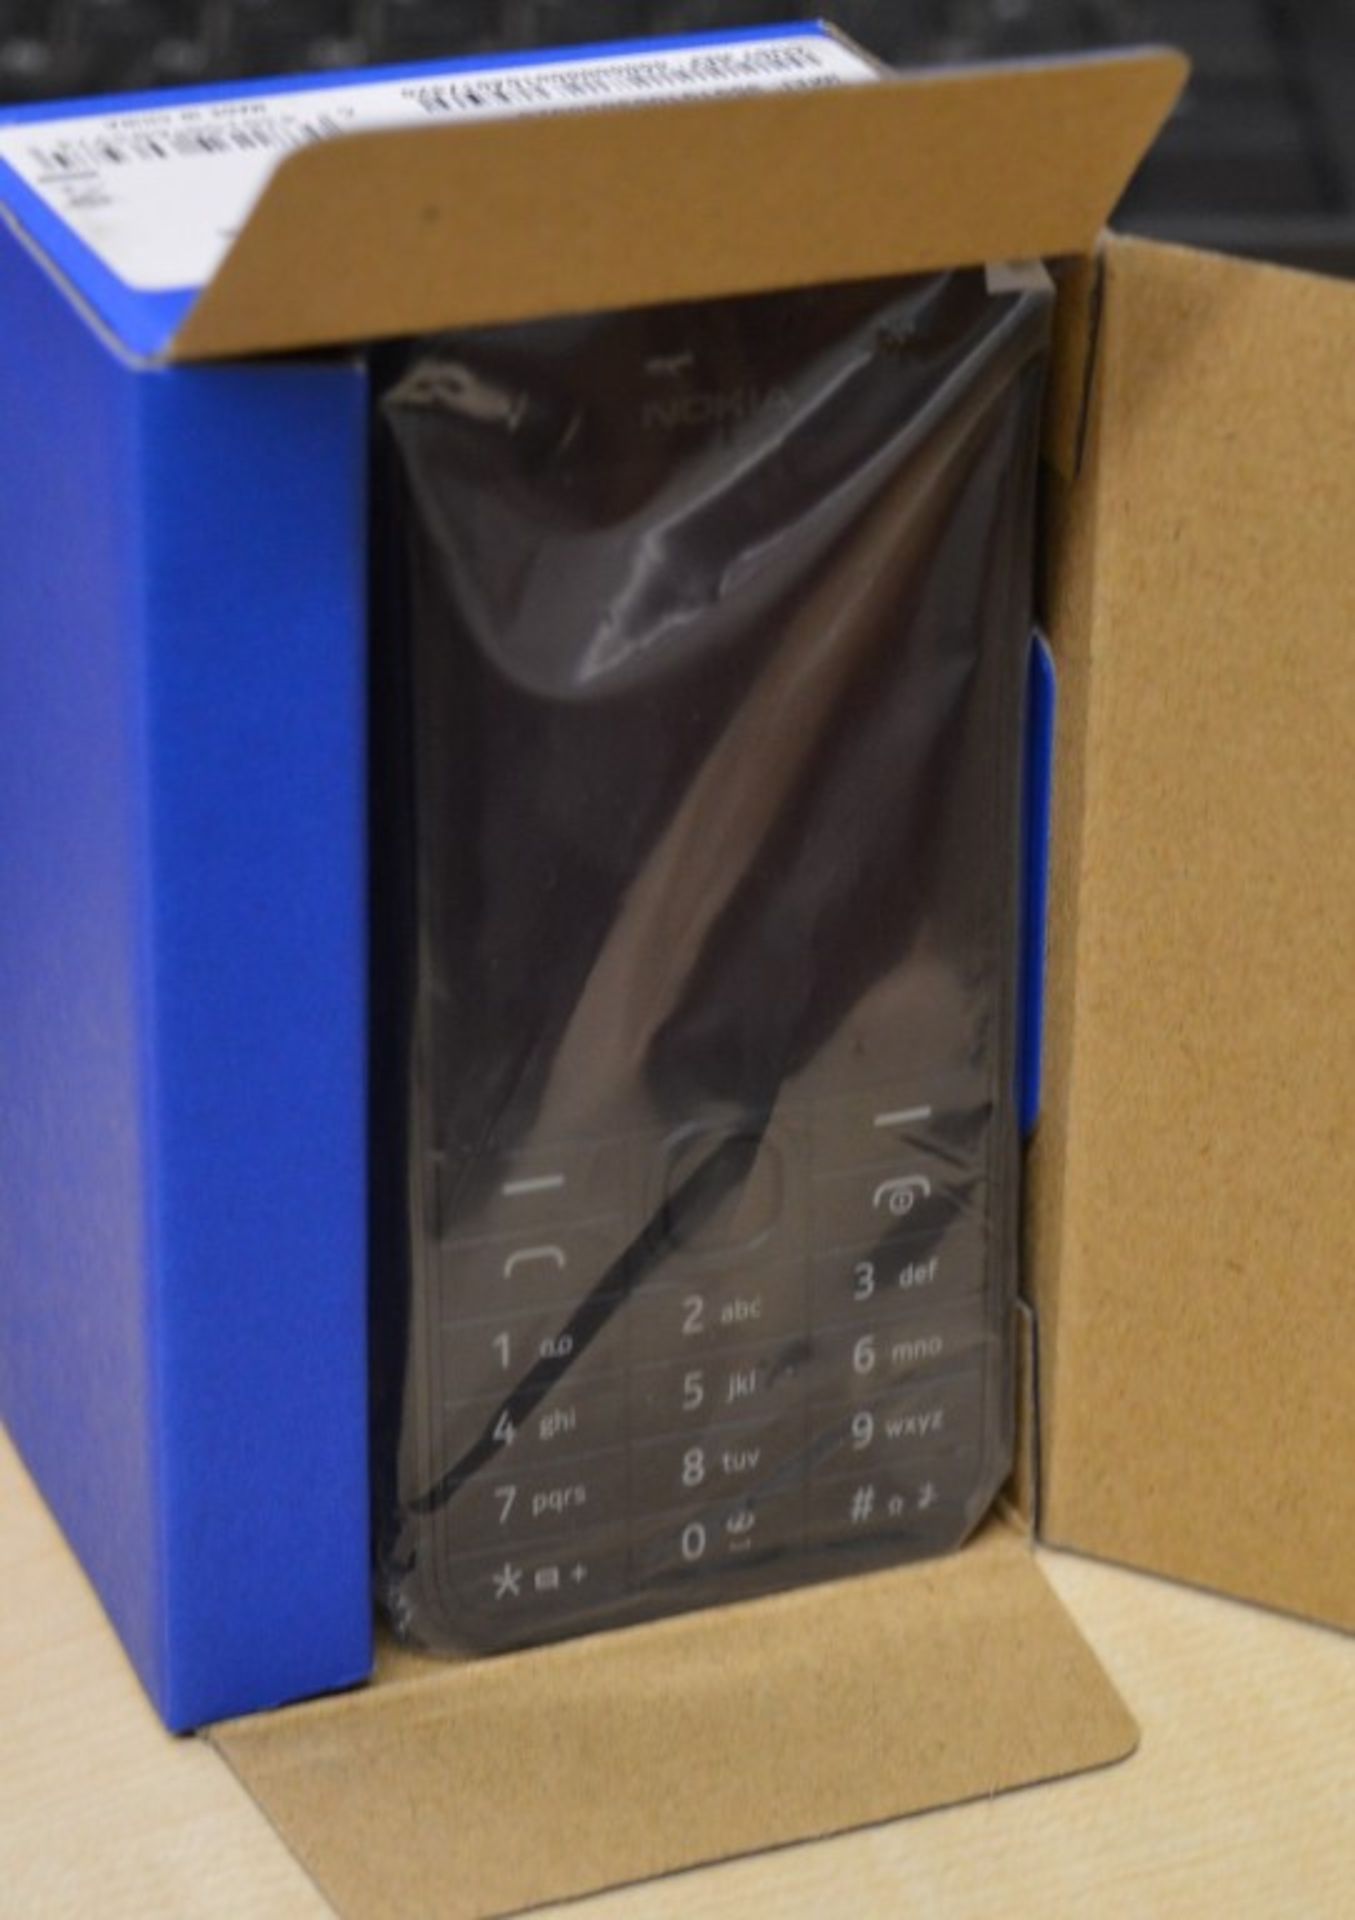 1 x Nokia 208.1 RM-948 Mobile Phone - Unused Boxed Stock - Box Opened But Contents Unused - Includes - Image 2 of 4